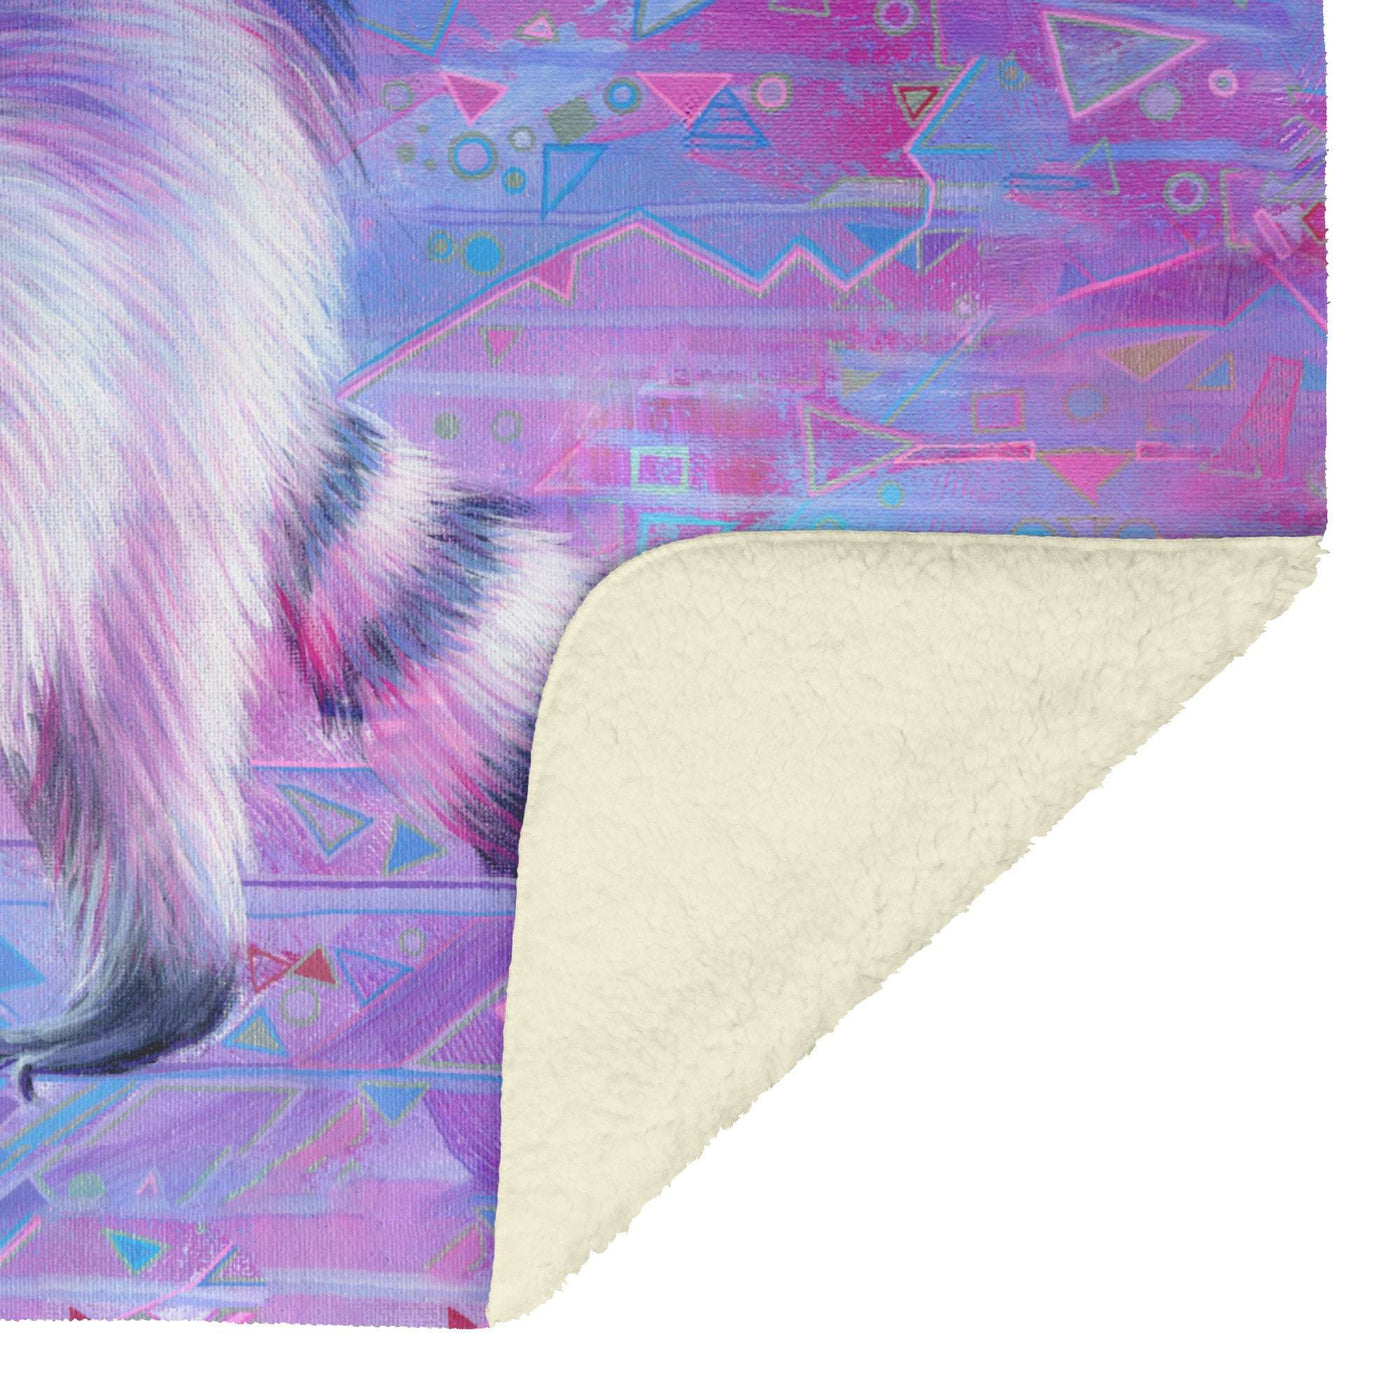 Raccoon Blanket with purple and pink tones and a soft white lining, folded partially to reveal fleece texture